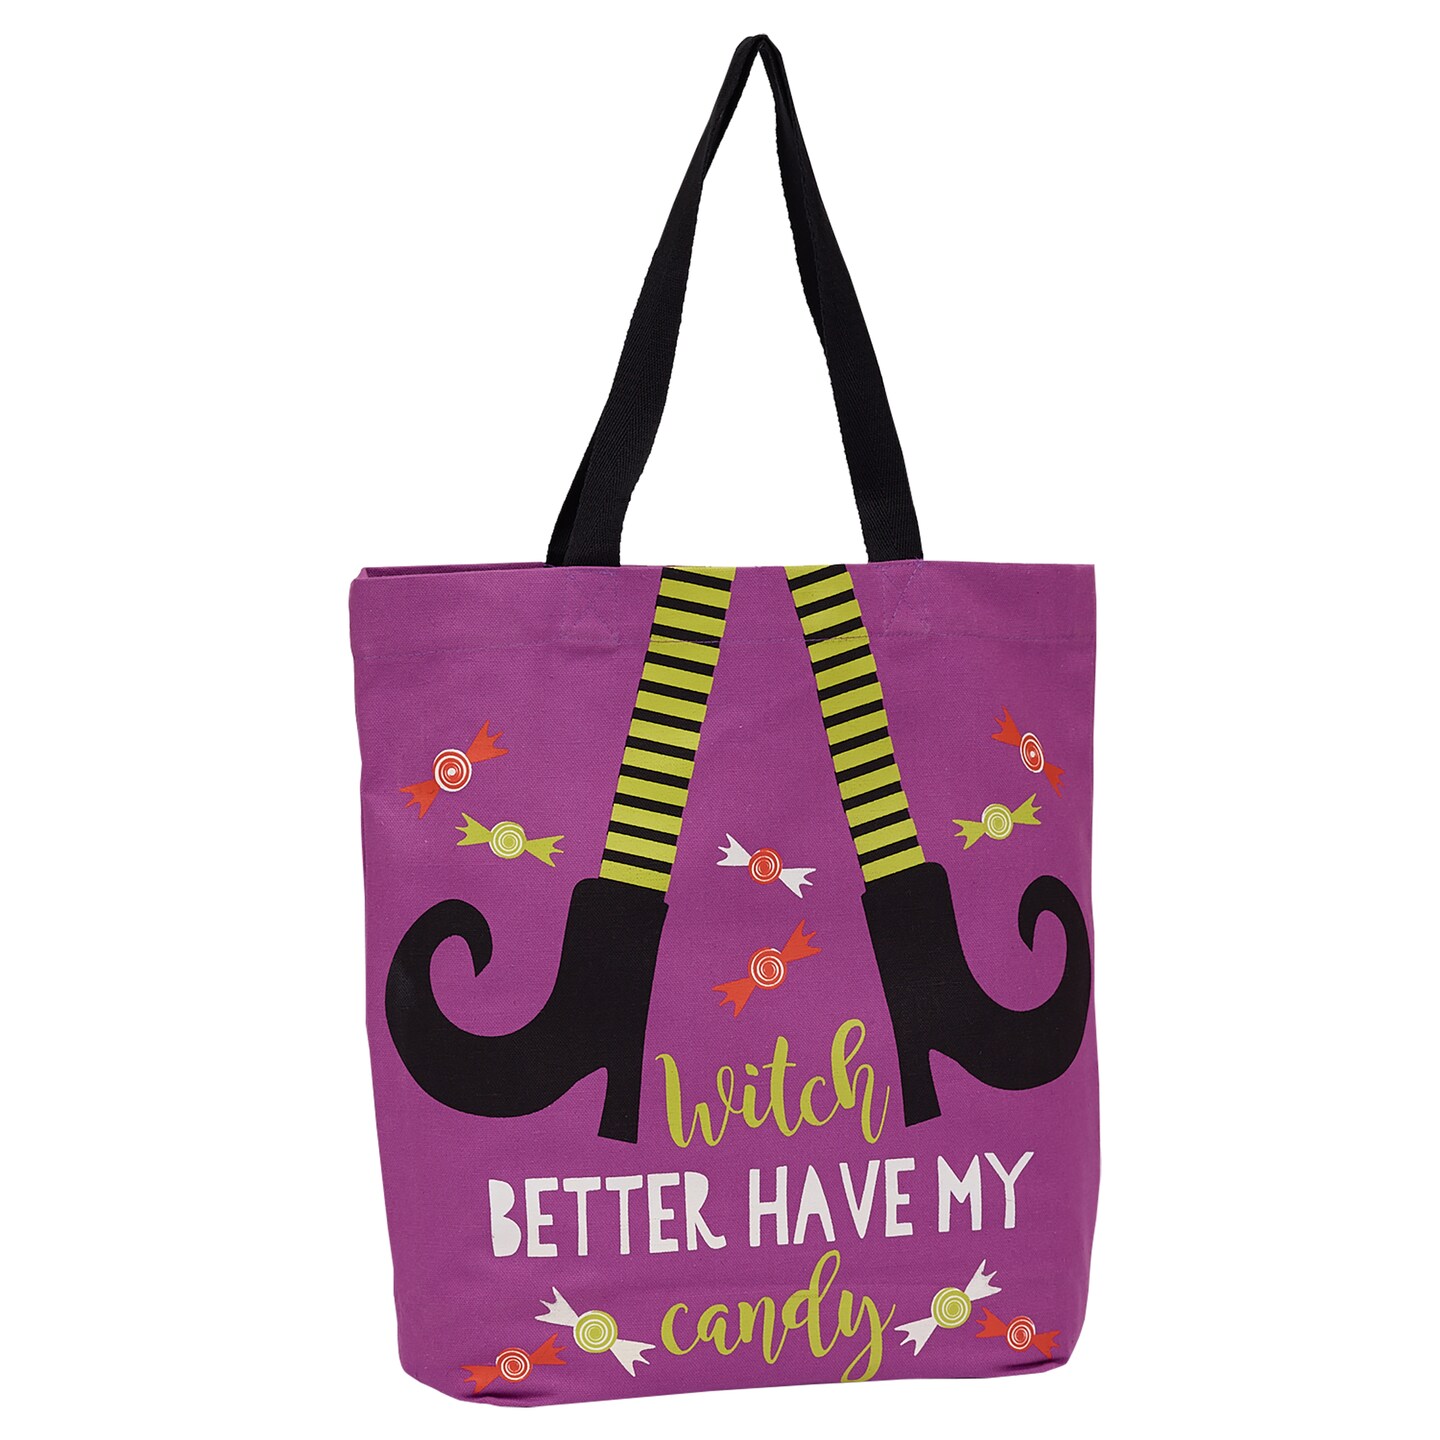 BEWITCHED PRINTED TOTES SET/2 | Michaels